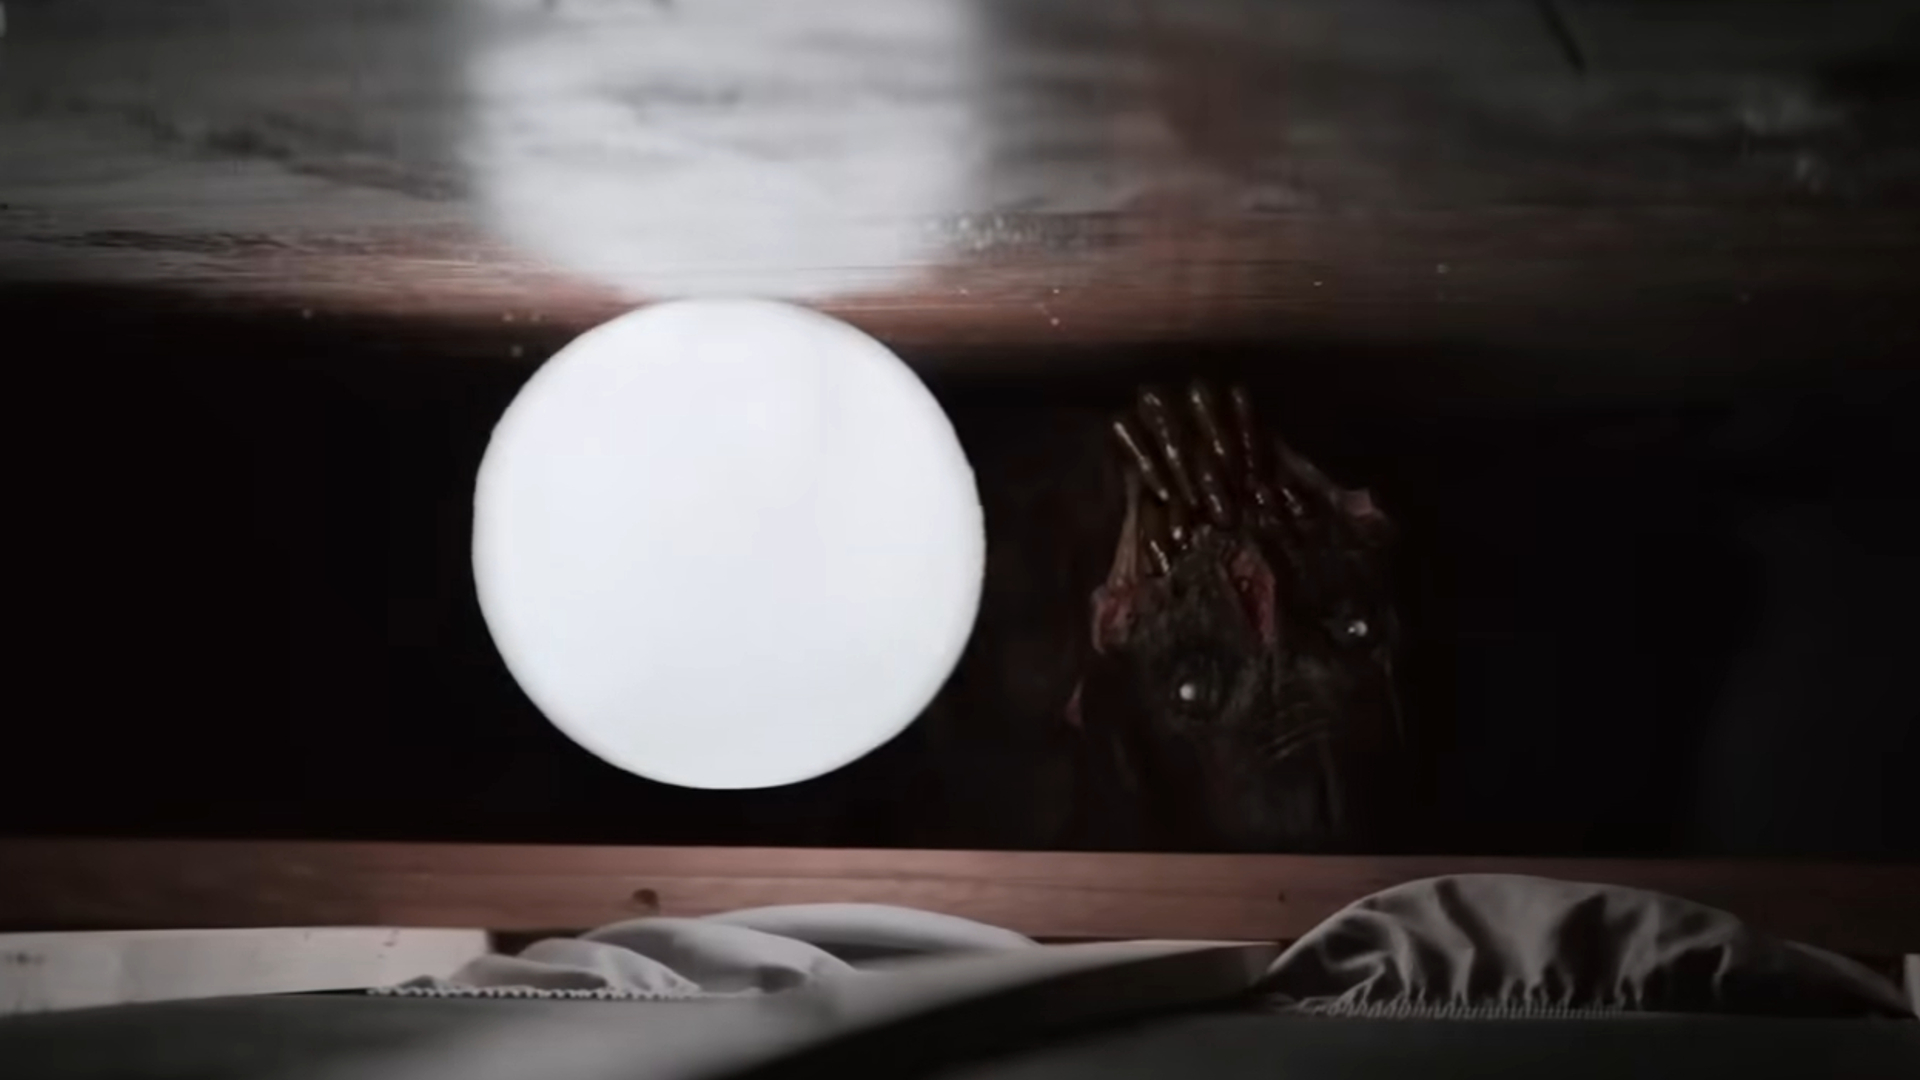 The Next Stephen King Adaptation, The Boogeyman, Gets Spooky First Trailer